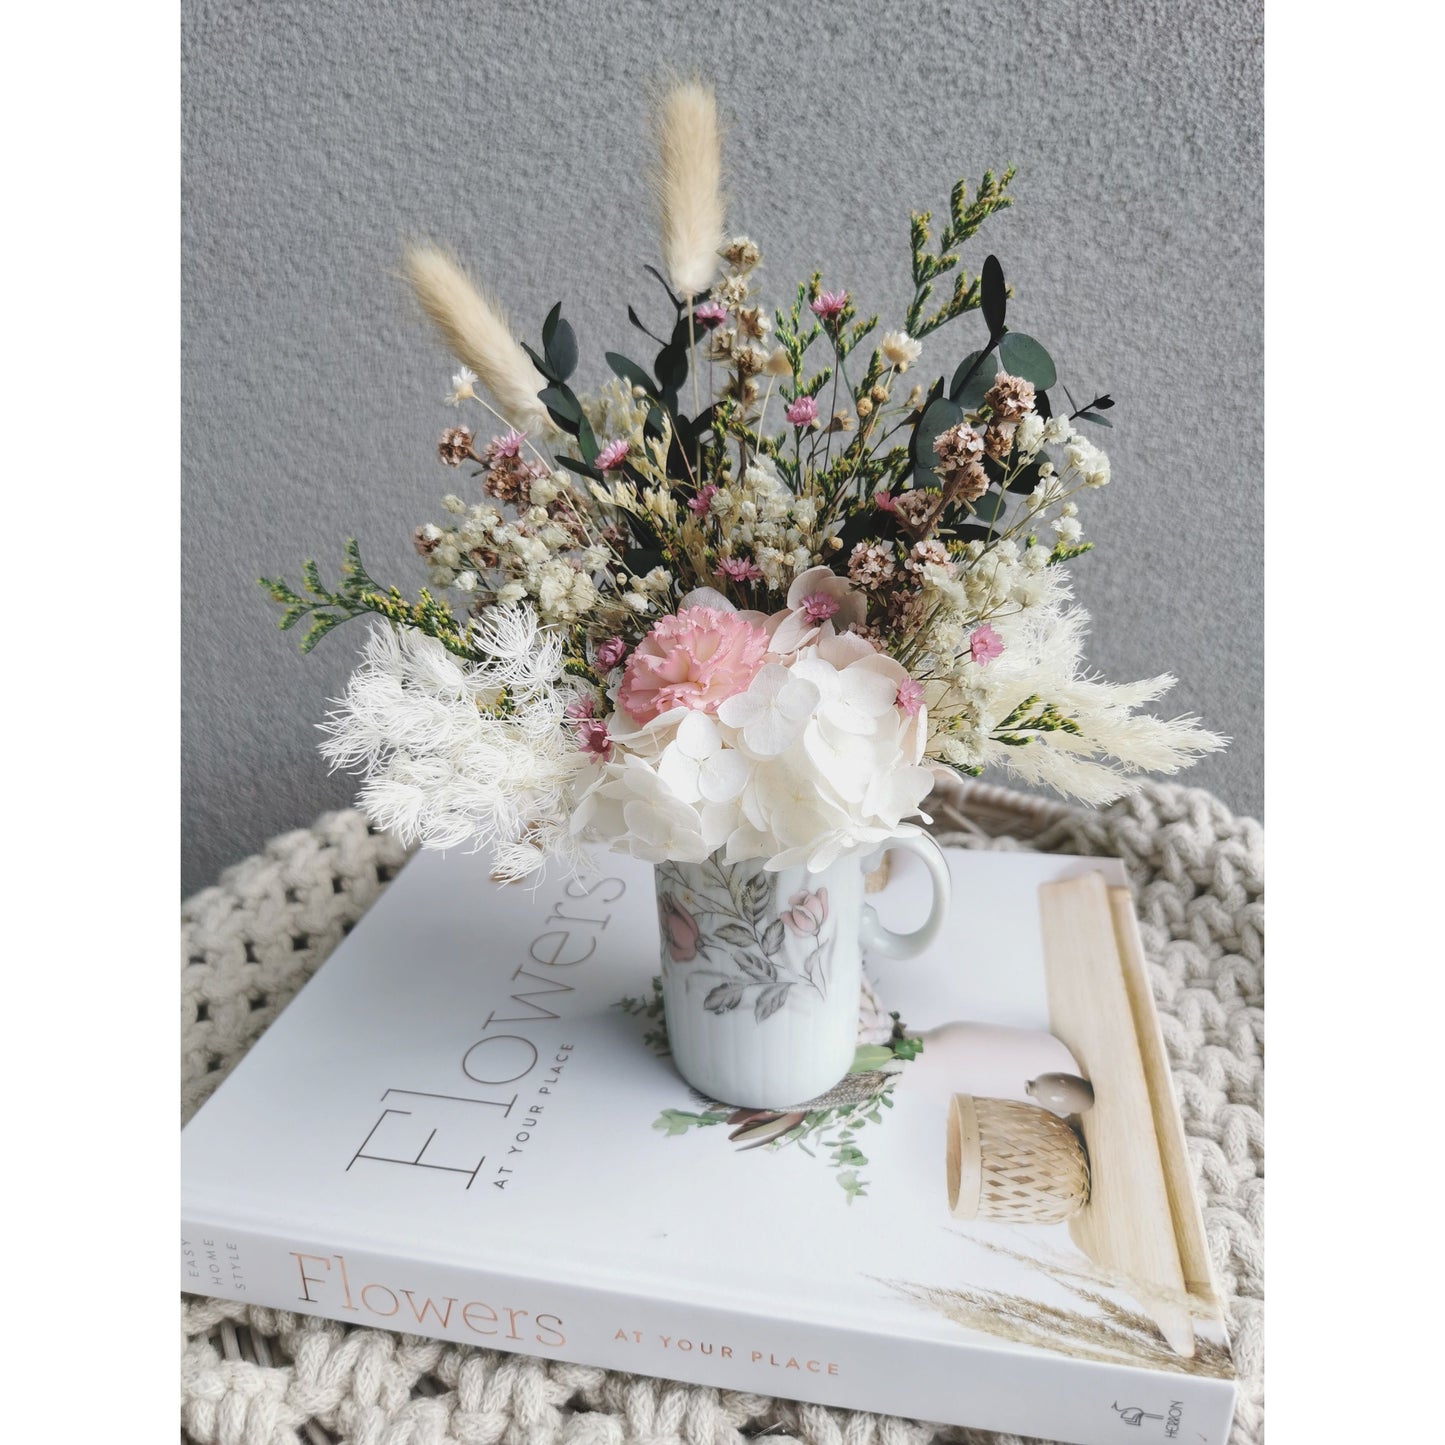 Mini Dried & Preserved flower arrangement with green, pink & white flowers in a mini geisha bone China Japan vase with handle. Photo shows arrangement sitting on a book on an angle against a blank wall